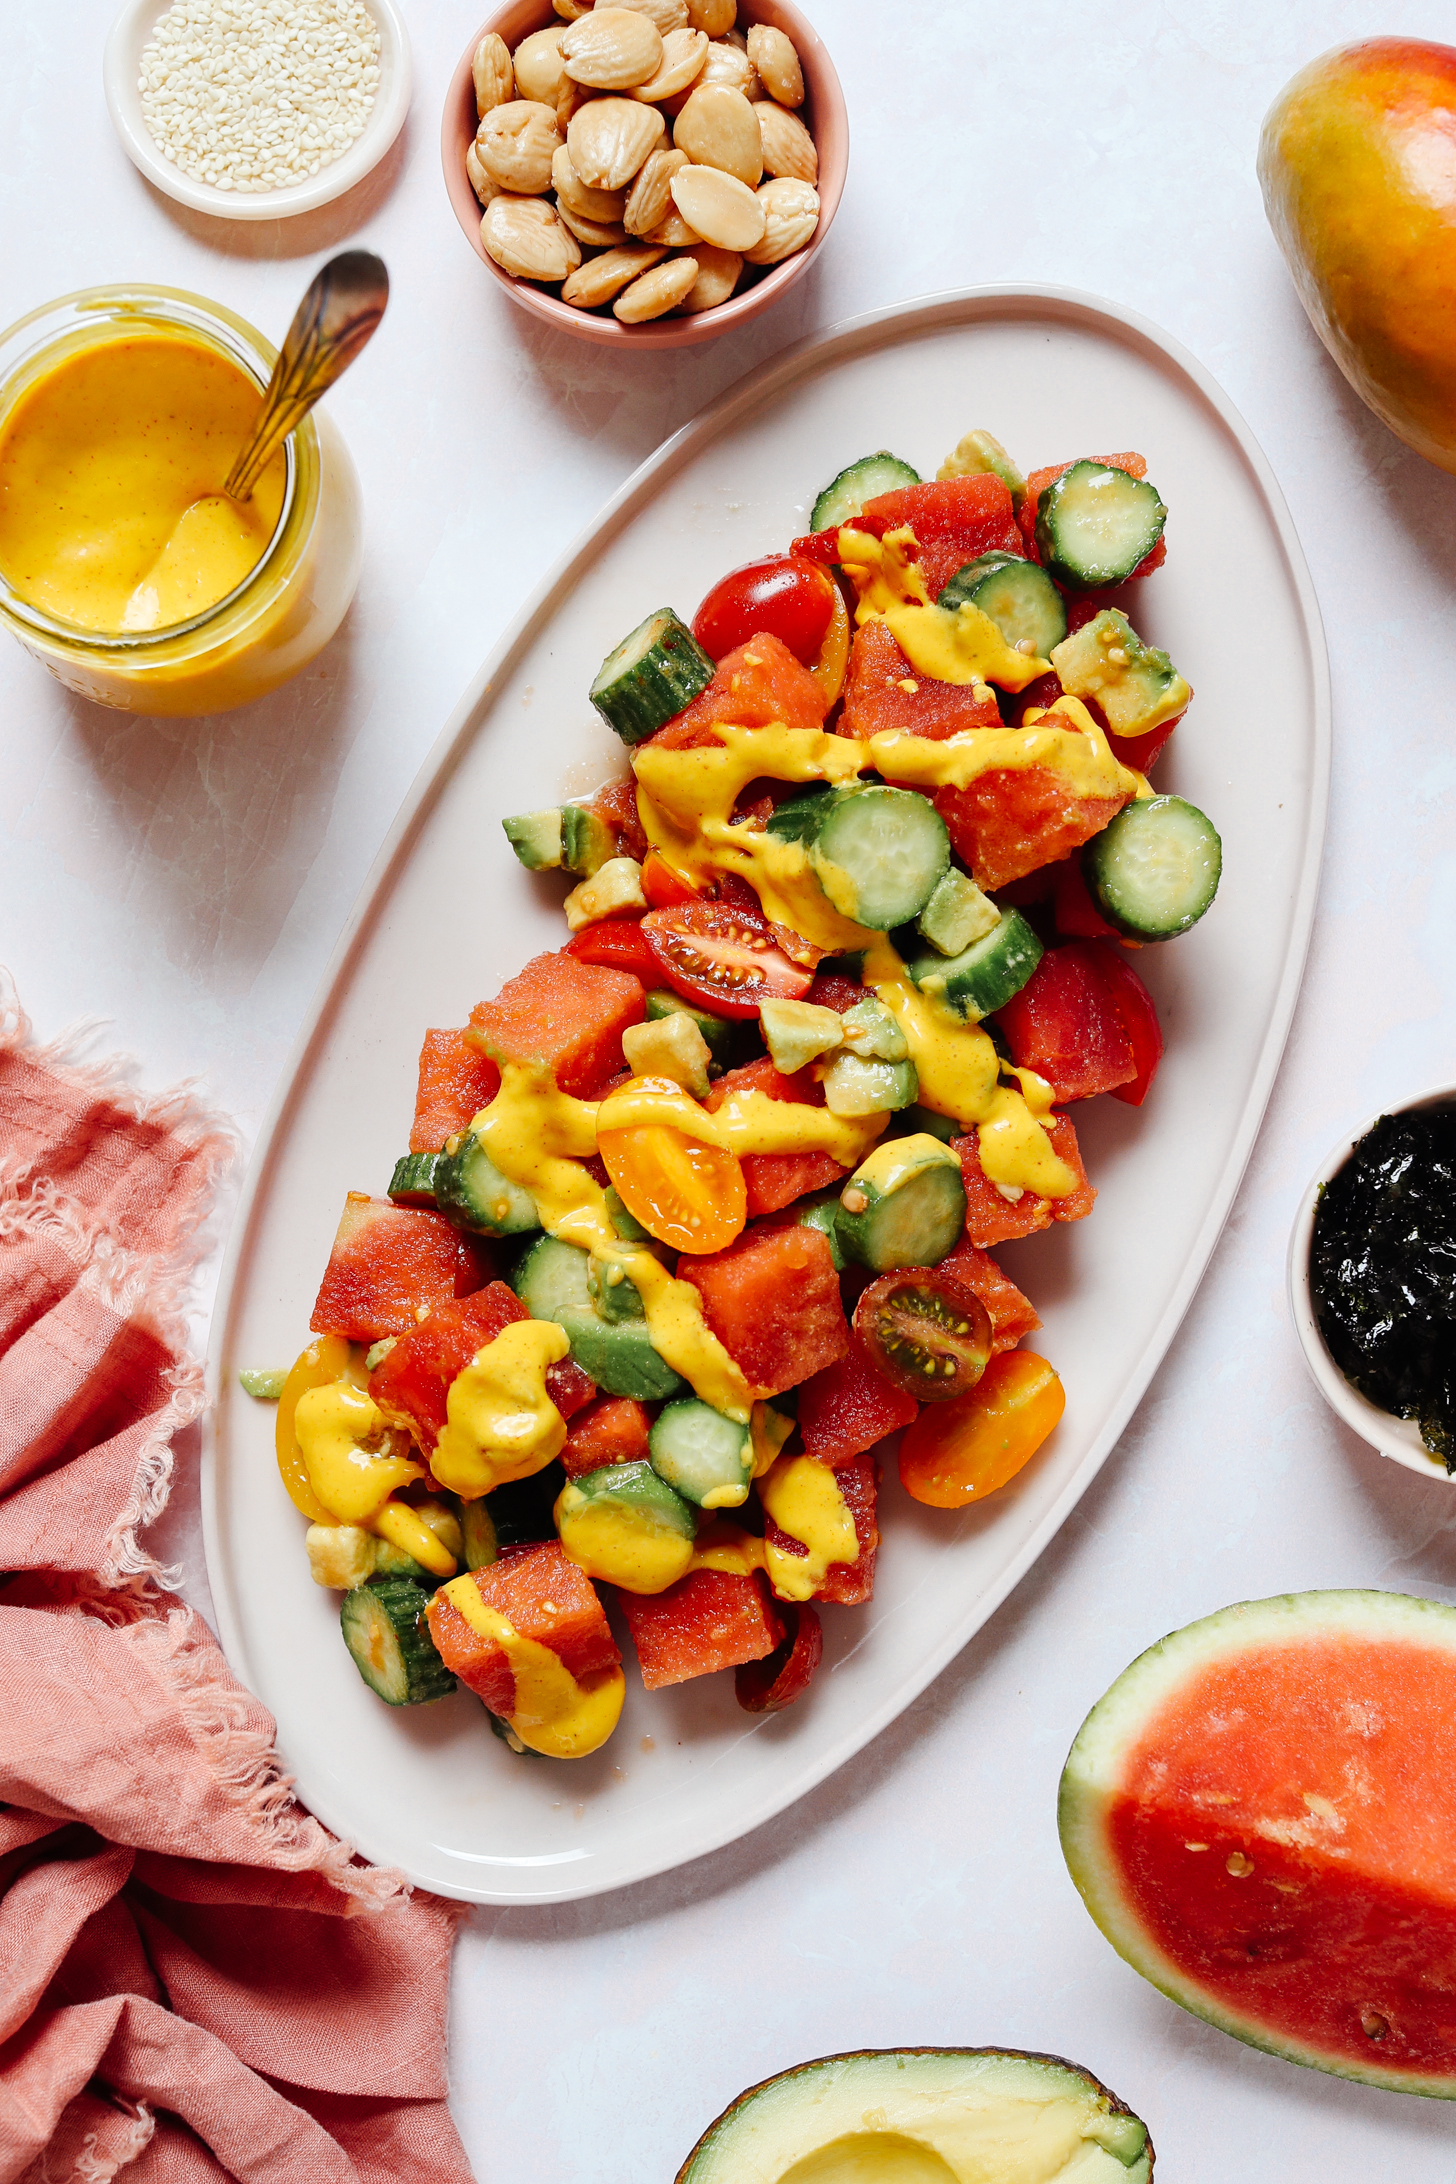 Platter of watermelon, cucumber, and tomatoes drizzled with spicy mango vinaigrette